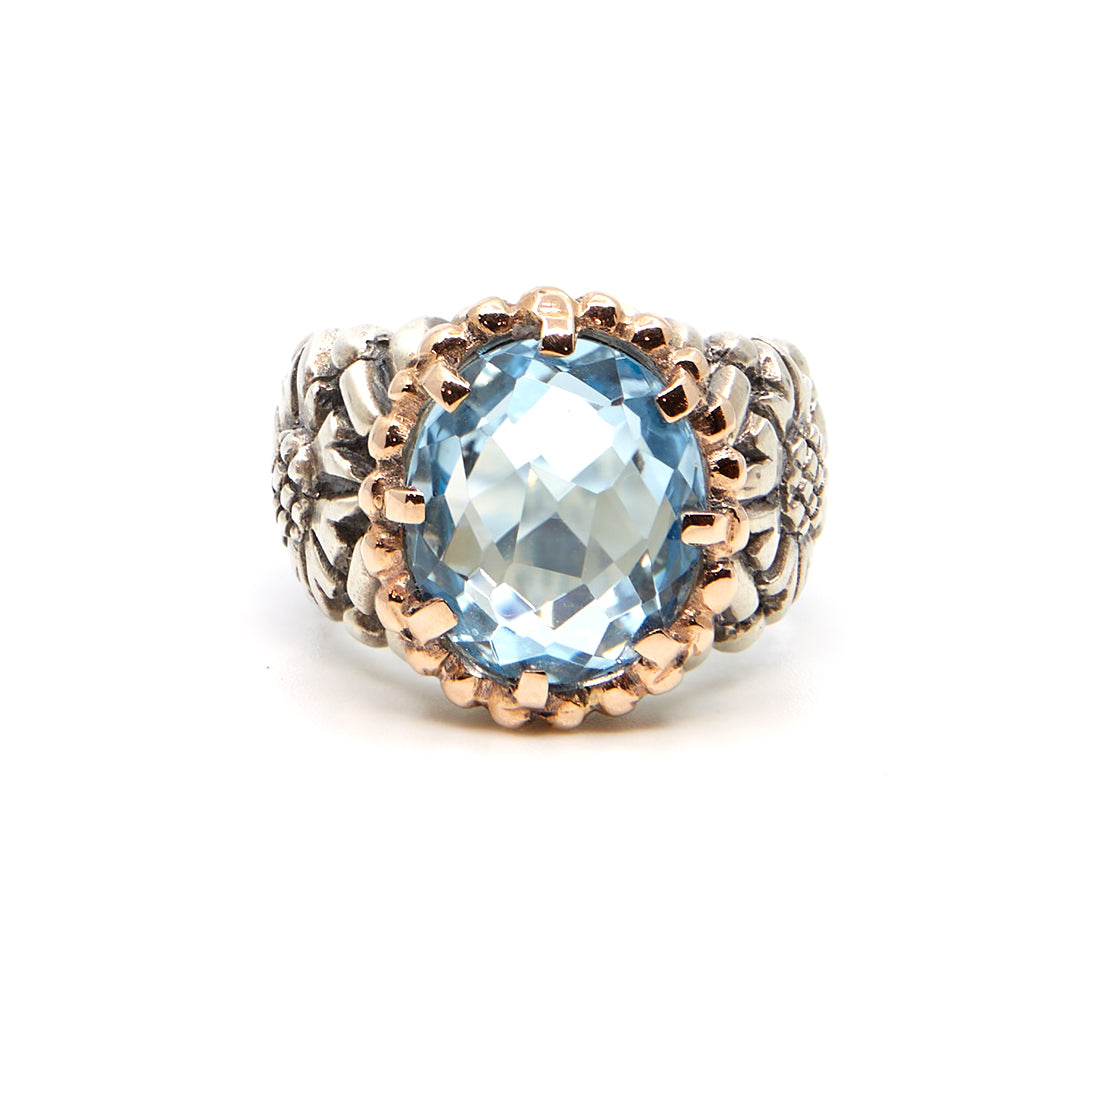 Silver and rose gold ring with topaz